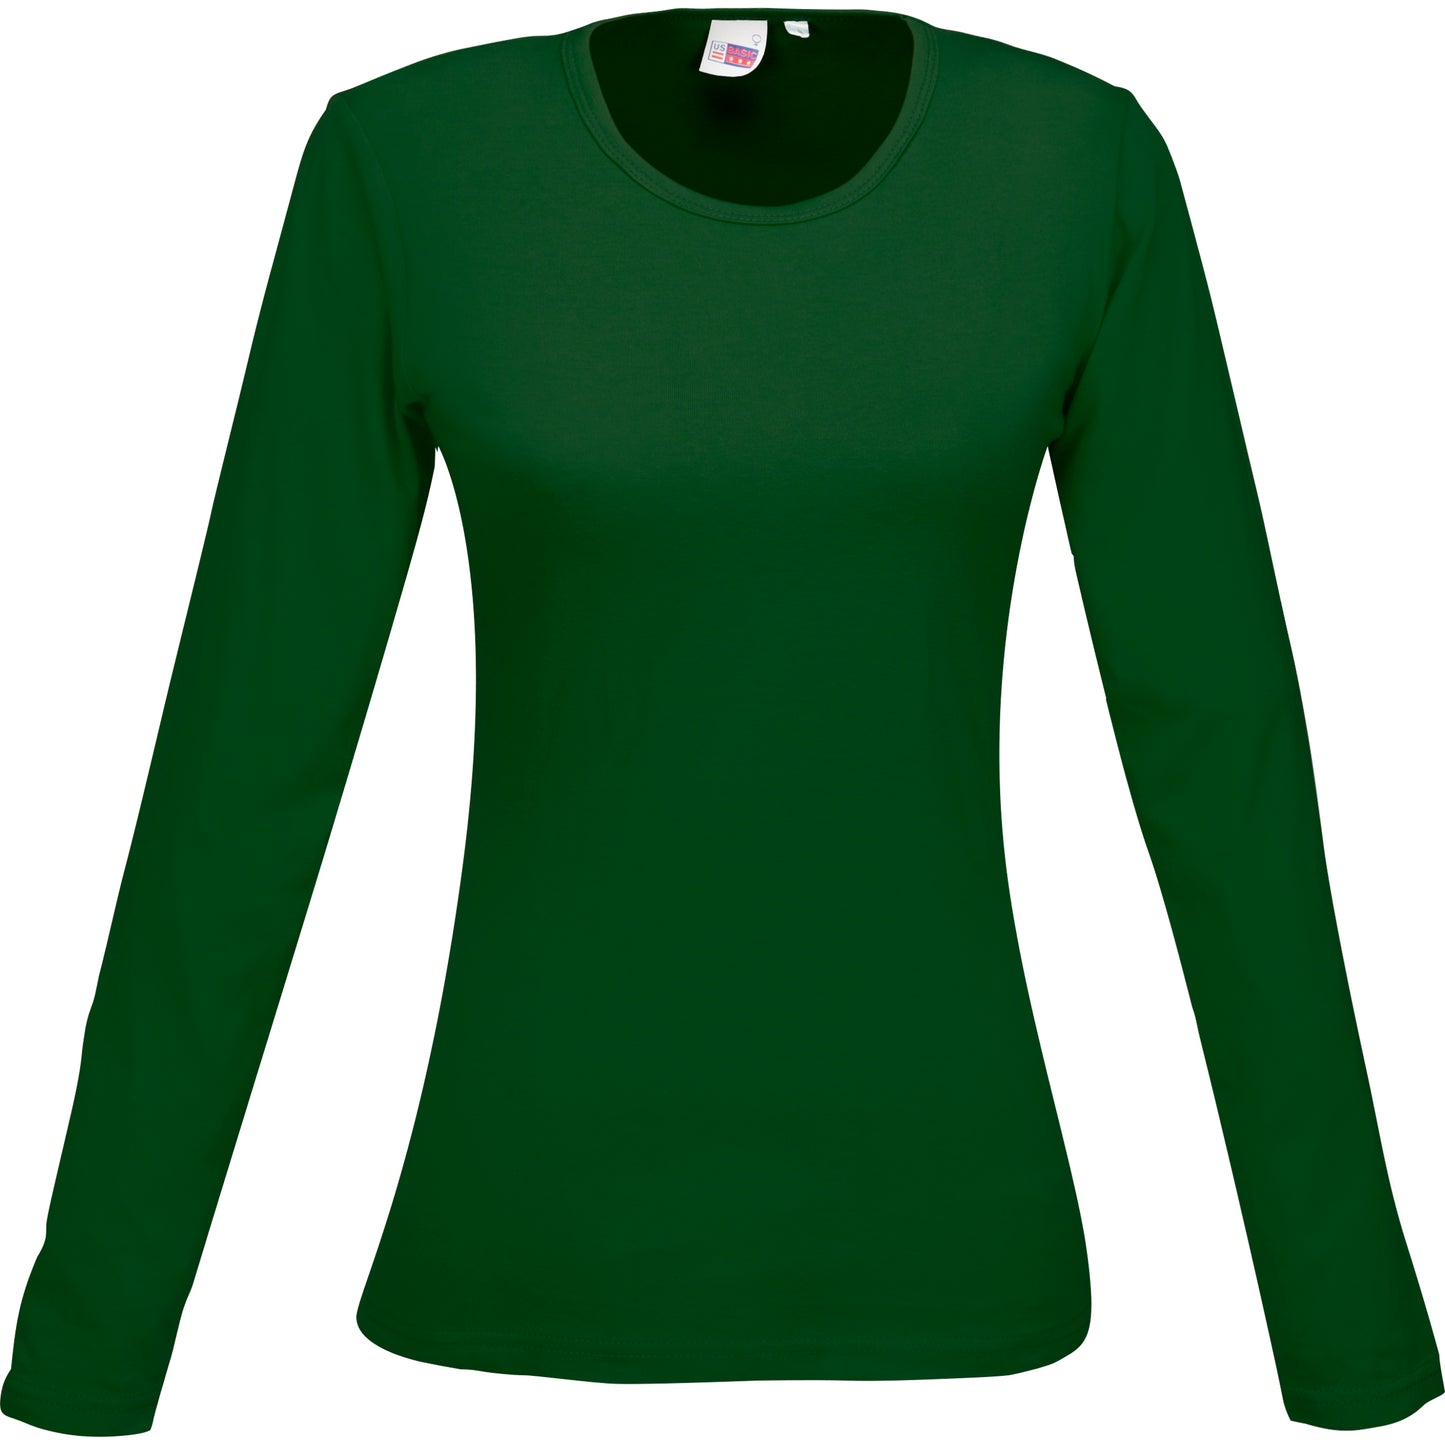 Ladies Long Sleeve Portland T-Shirt - Green Only